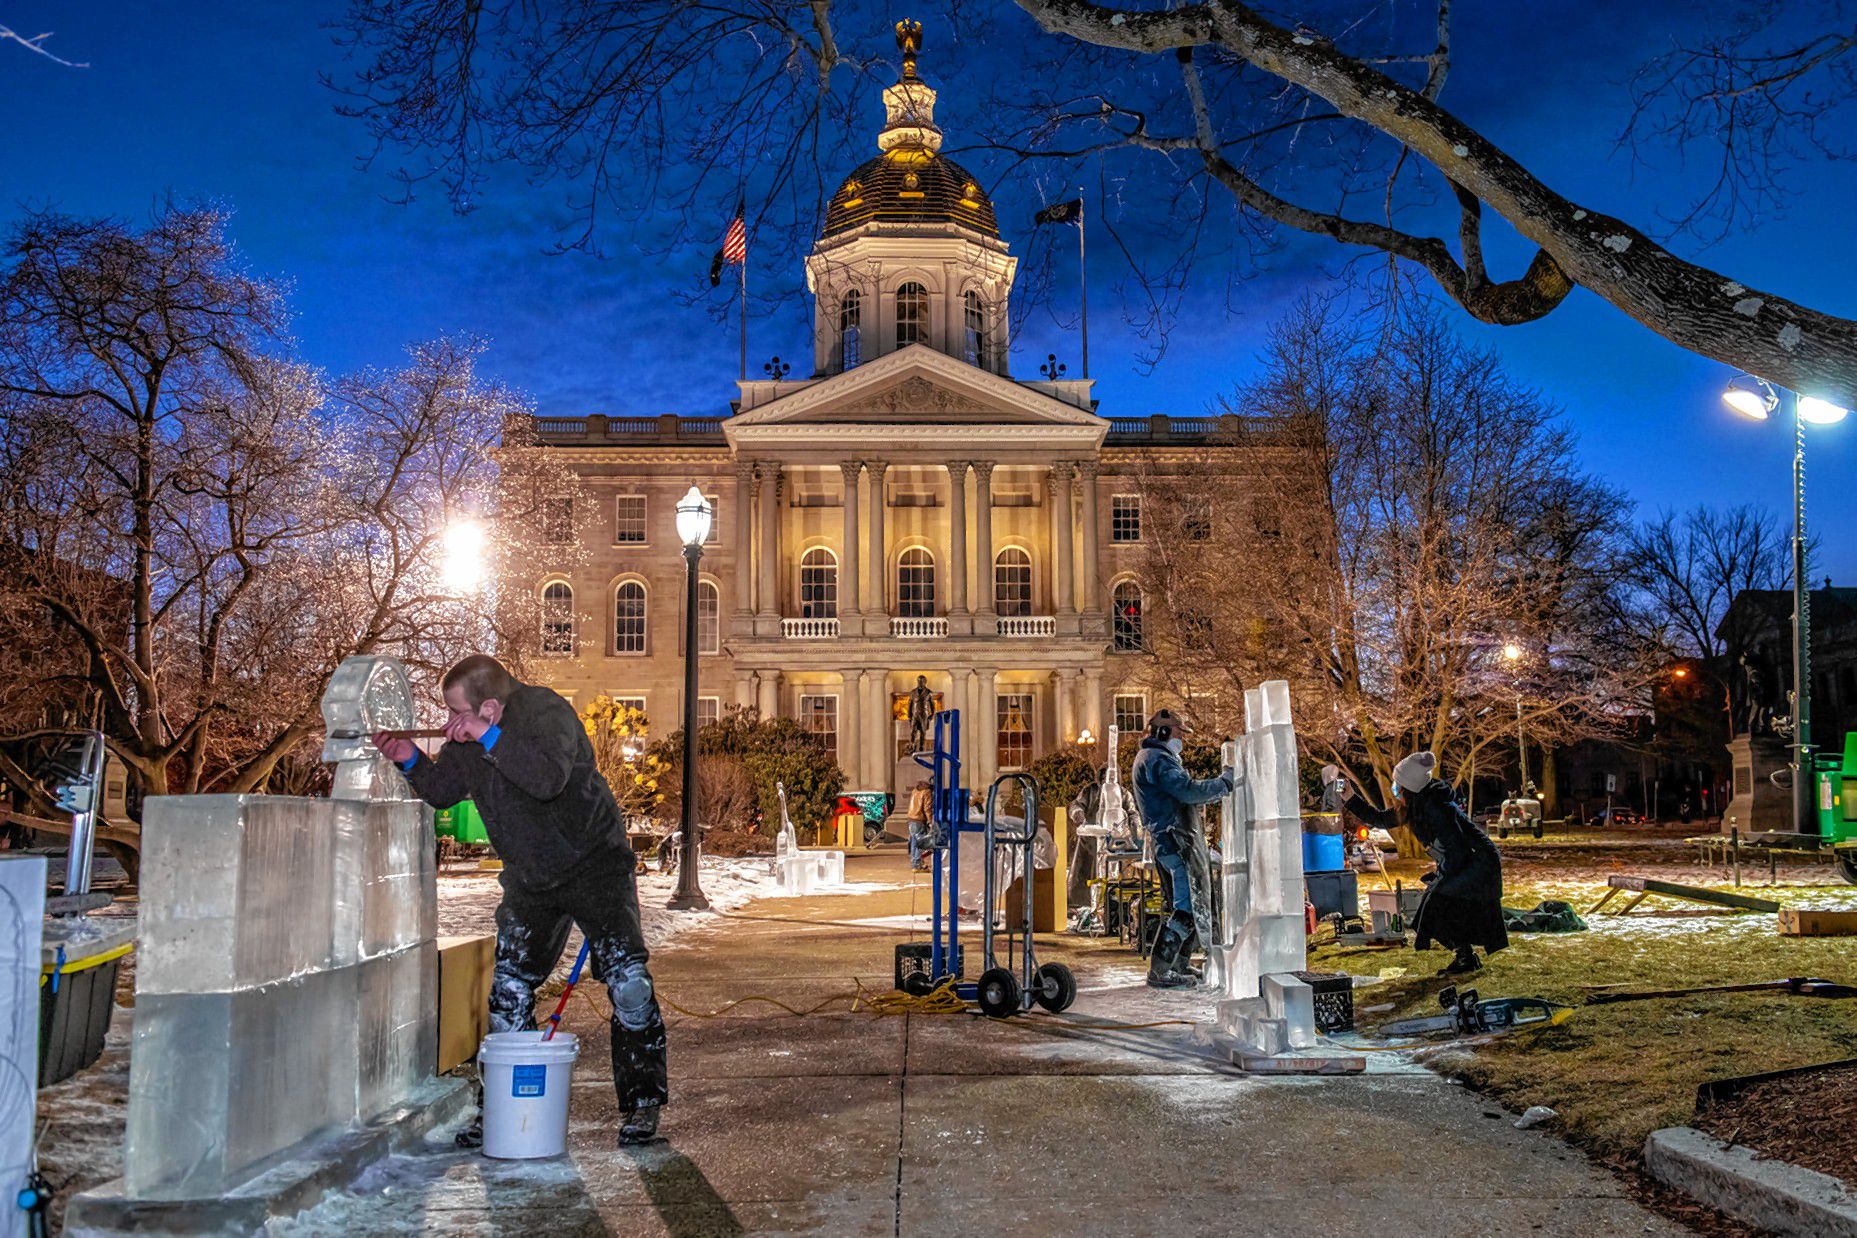 Winter Festival returns for icy celebration The Concord Insider